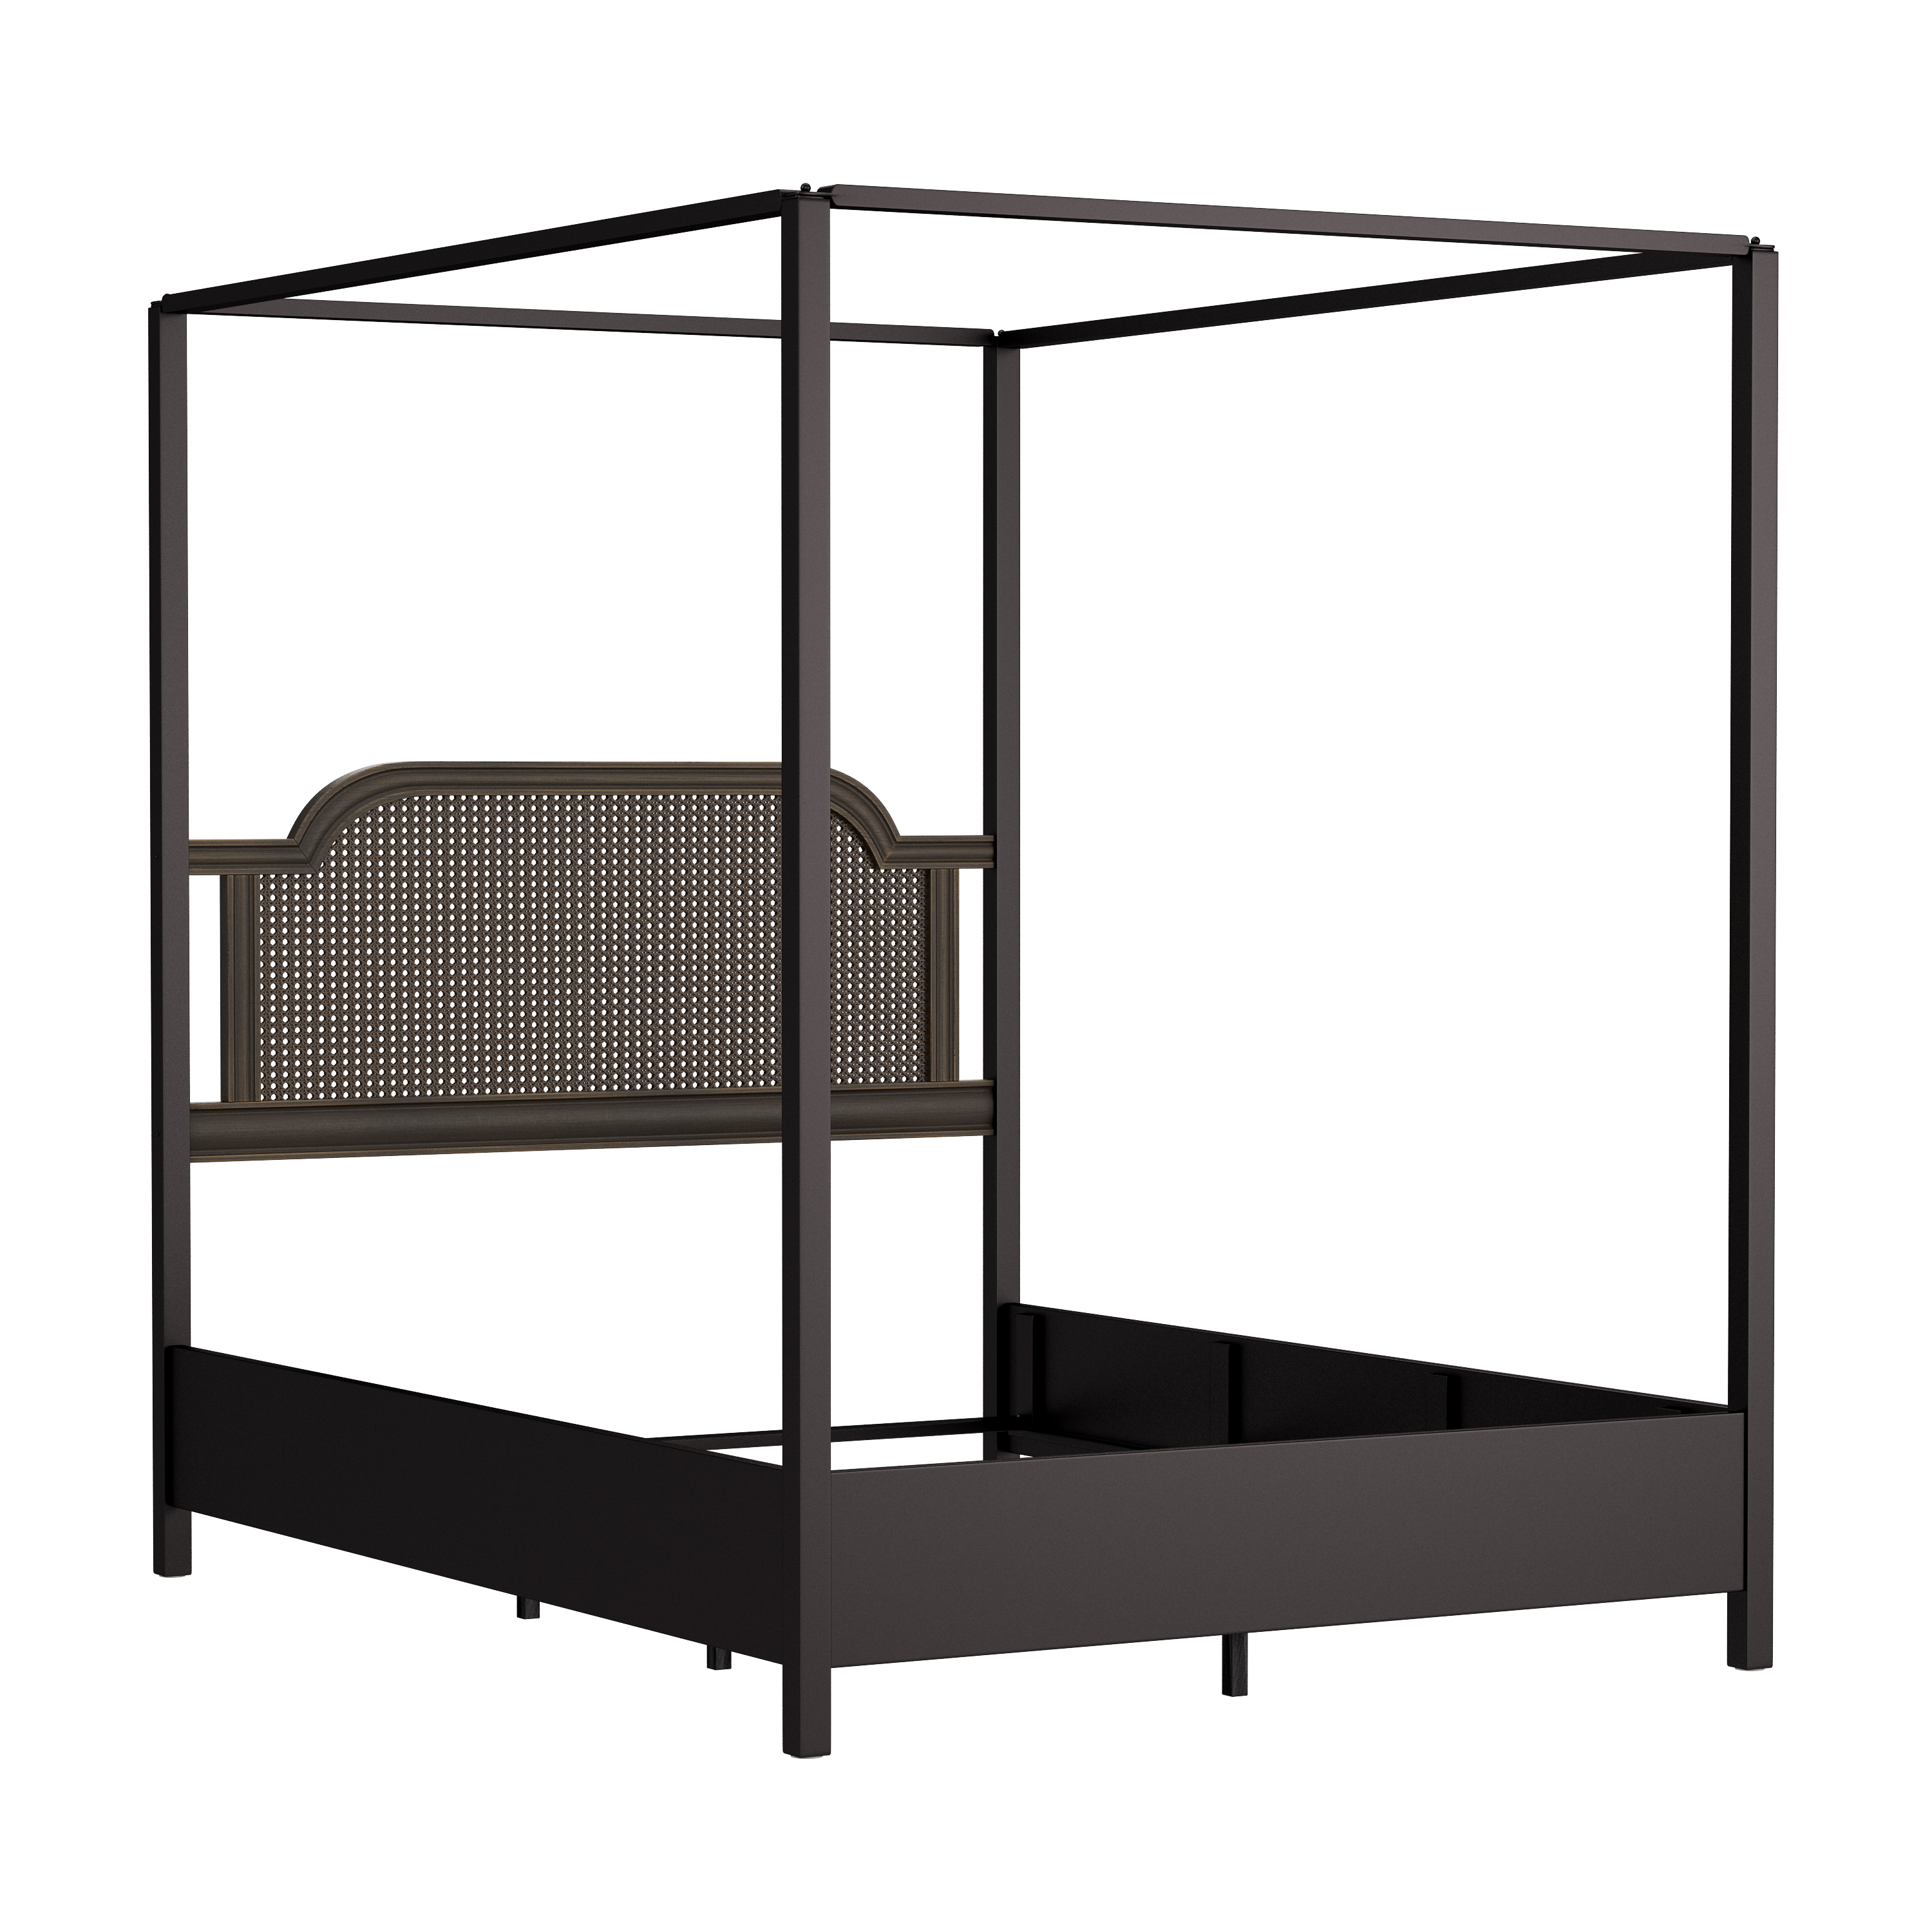 Hillsdale Melanie Wood and Metal Canopy Bed - Oiled Bronze